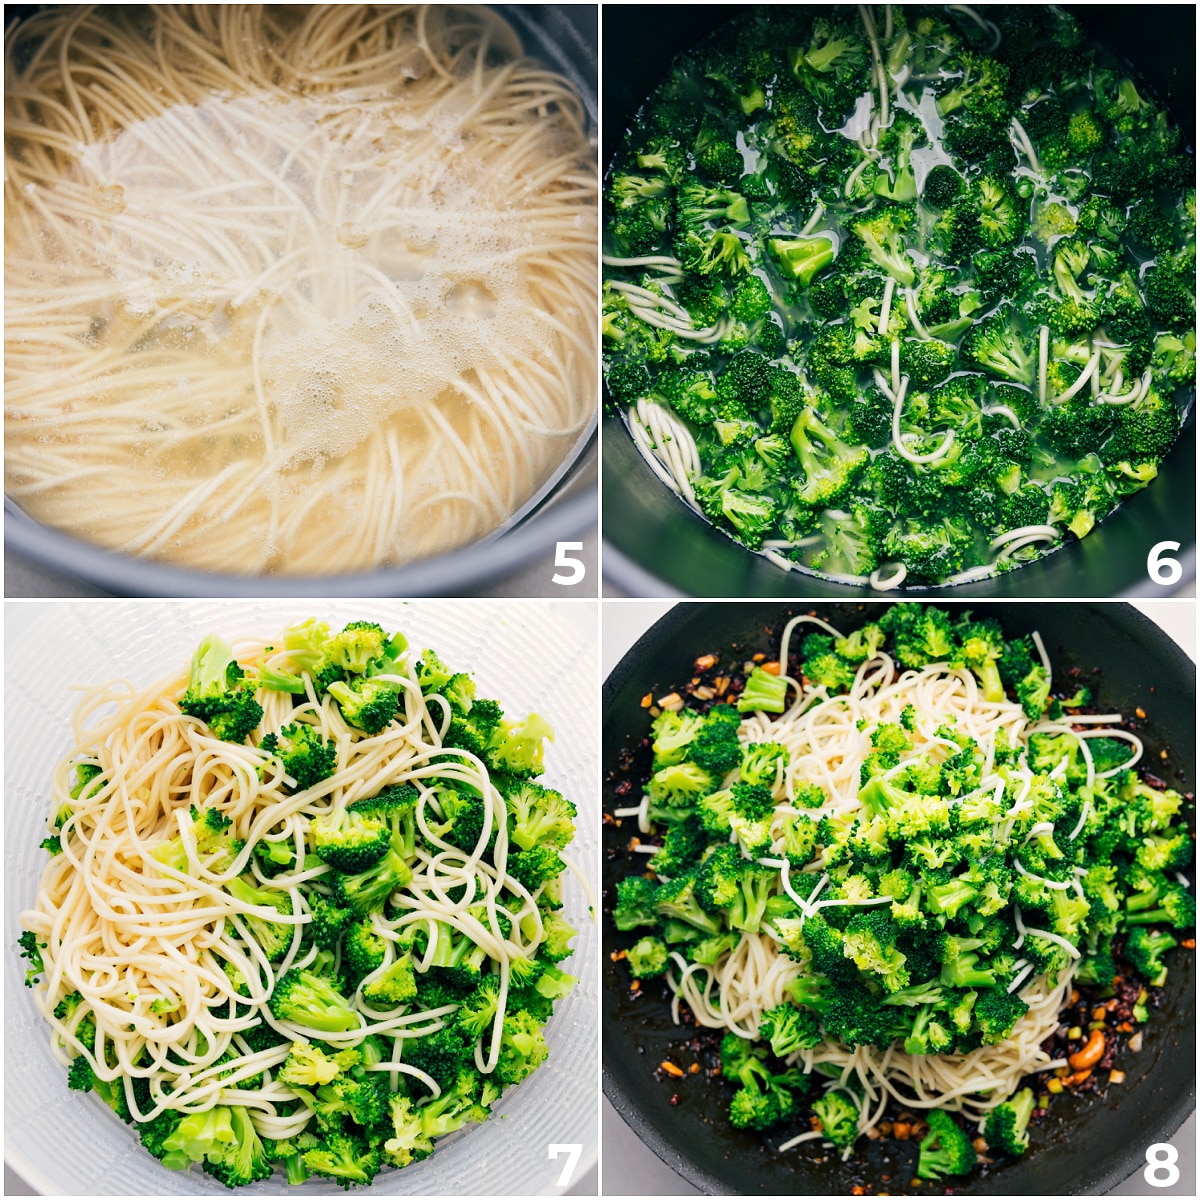 The noodles being cooked and broccoli being added and cooked then added to the sauce.